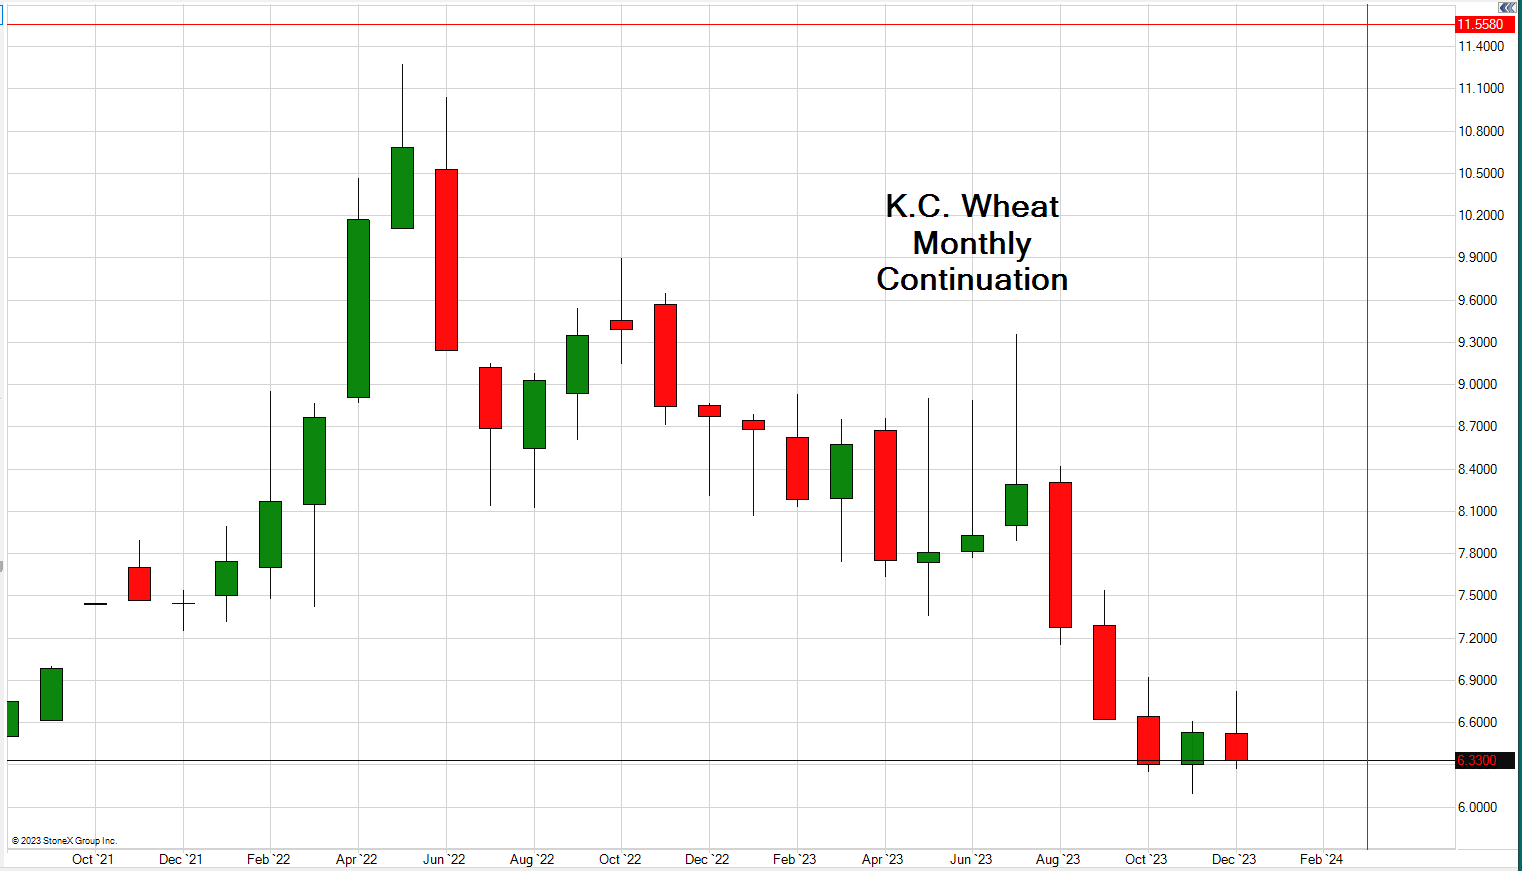 KCBT Red Wheat Futures Trading Chart updated October 13th, 2022